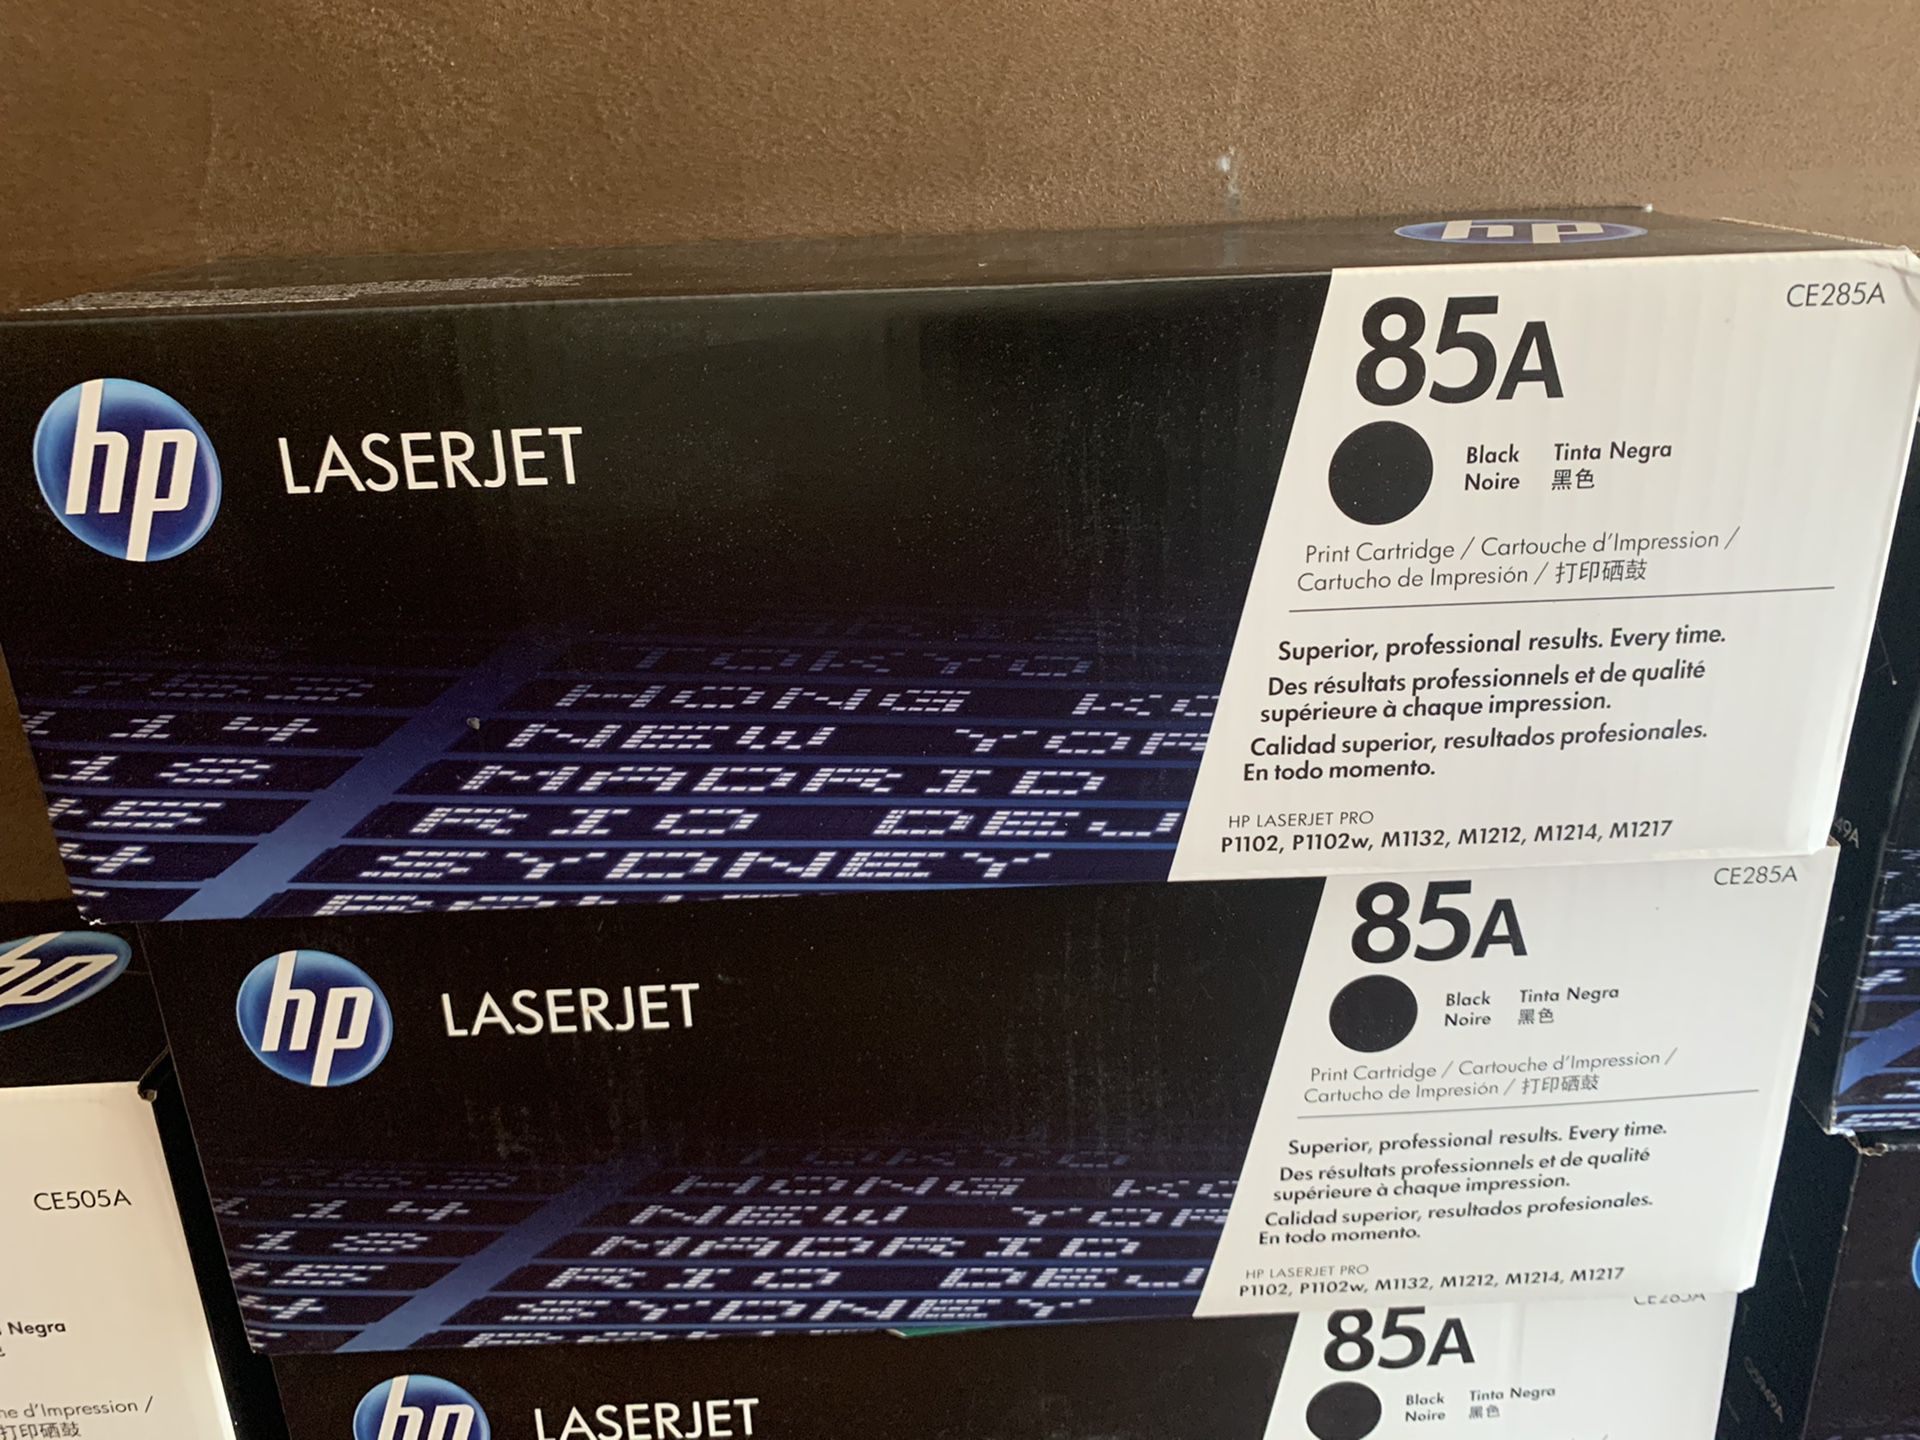 New HP laser jet printer cartridge for CE285a